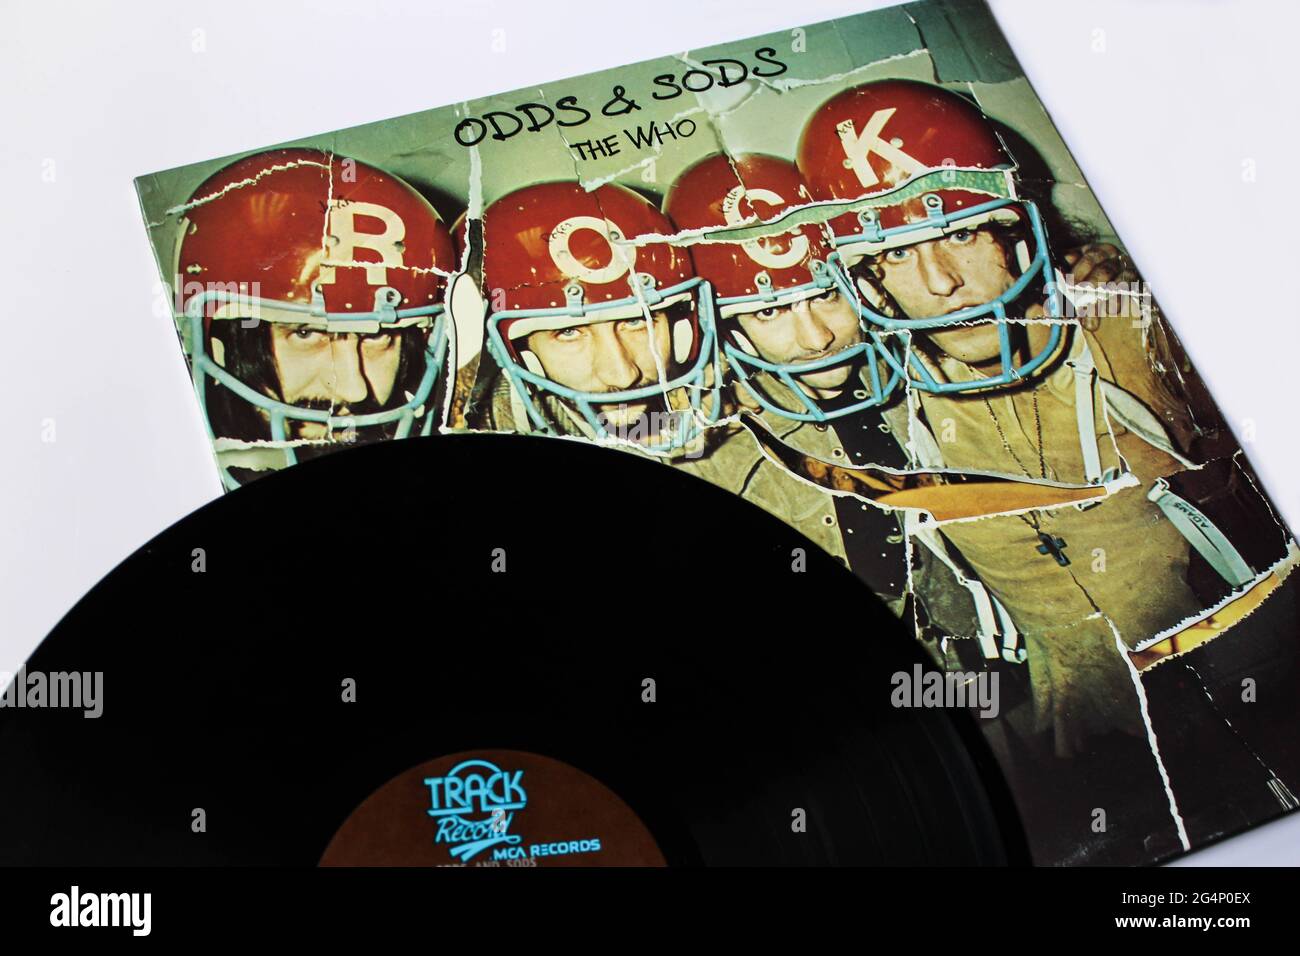 English Rock and hard rock band, The Who music album on vinyl record LP disc. Titled: Odds & Sods album cover Stock Photo